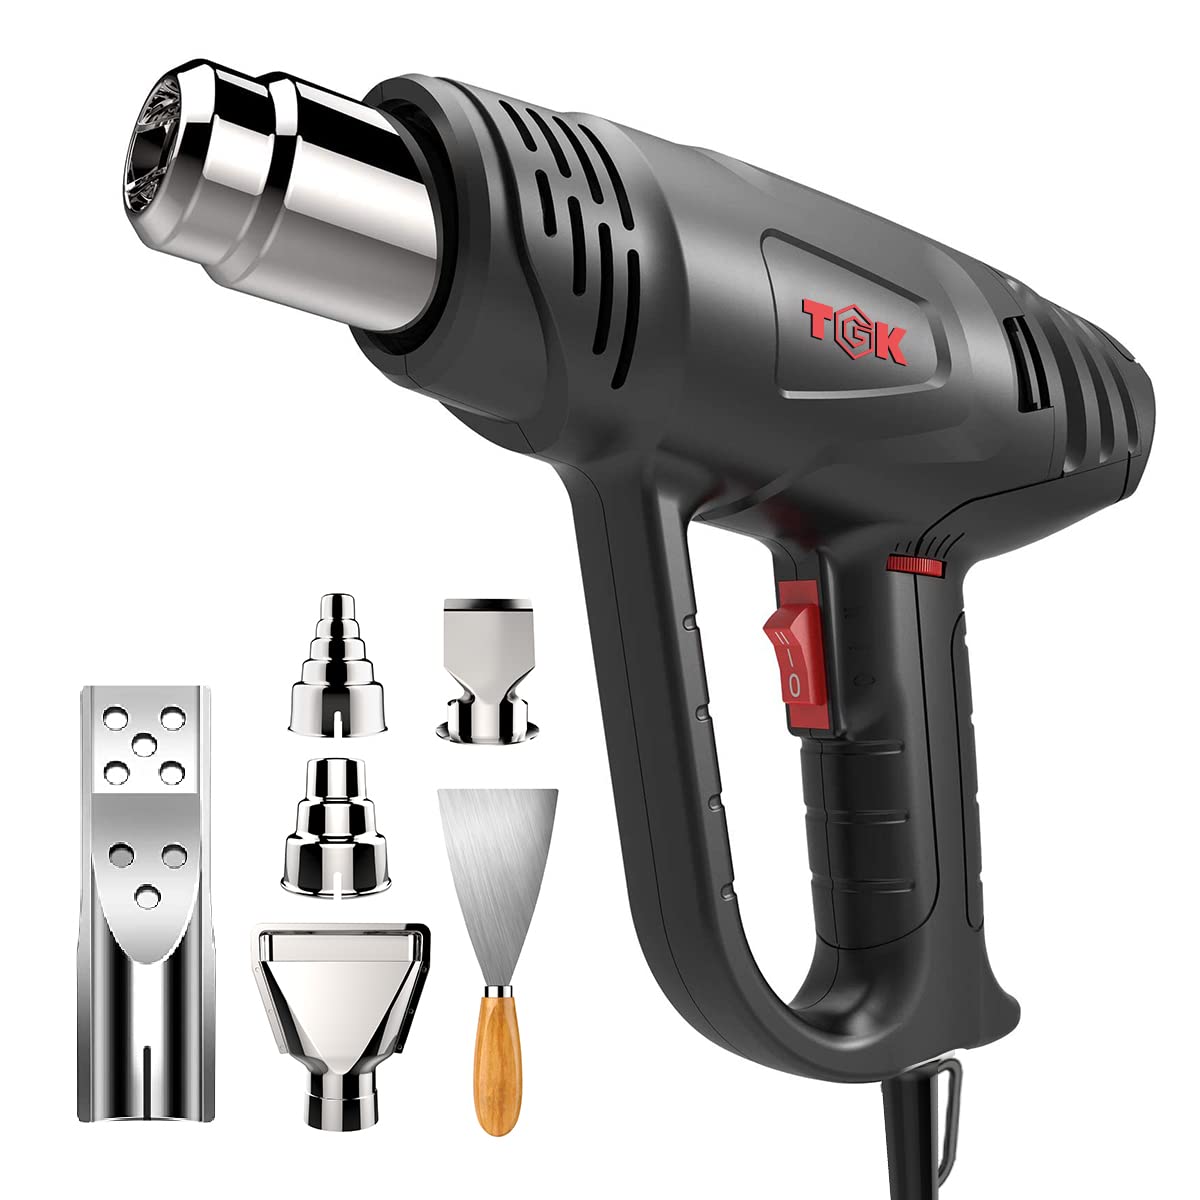 Factory Cheap Hot Heat Gun Shrink Wrap - Heat Gun, TGK 1800W Heavy Duty Hot Air Gun Kit 122℉~1202℉ Dual Temperature Settings with 6 Nozzle Attachments Overload Protection for Crafts, Shrink Wrappi...